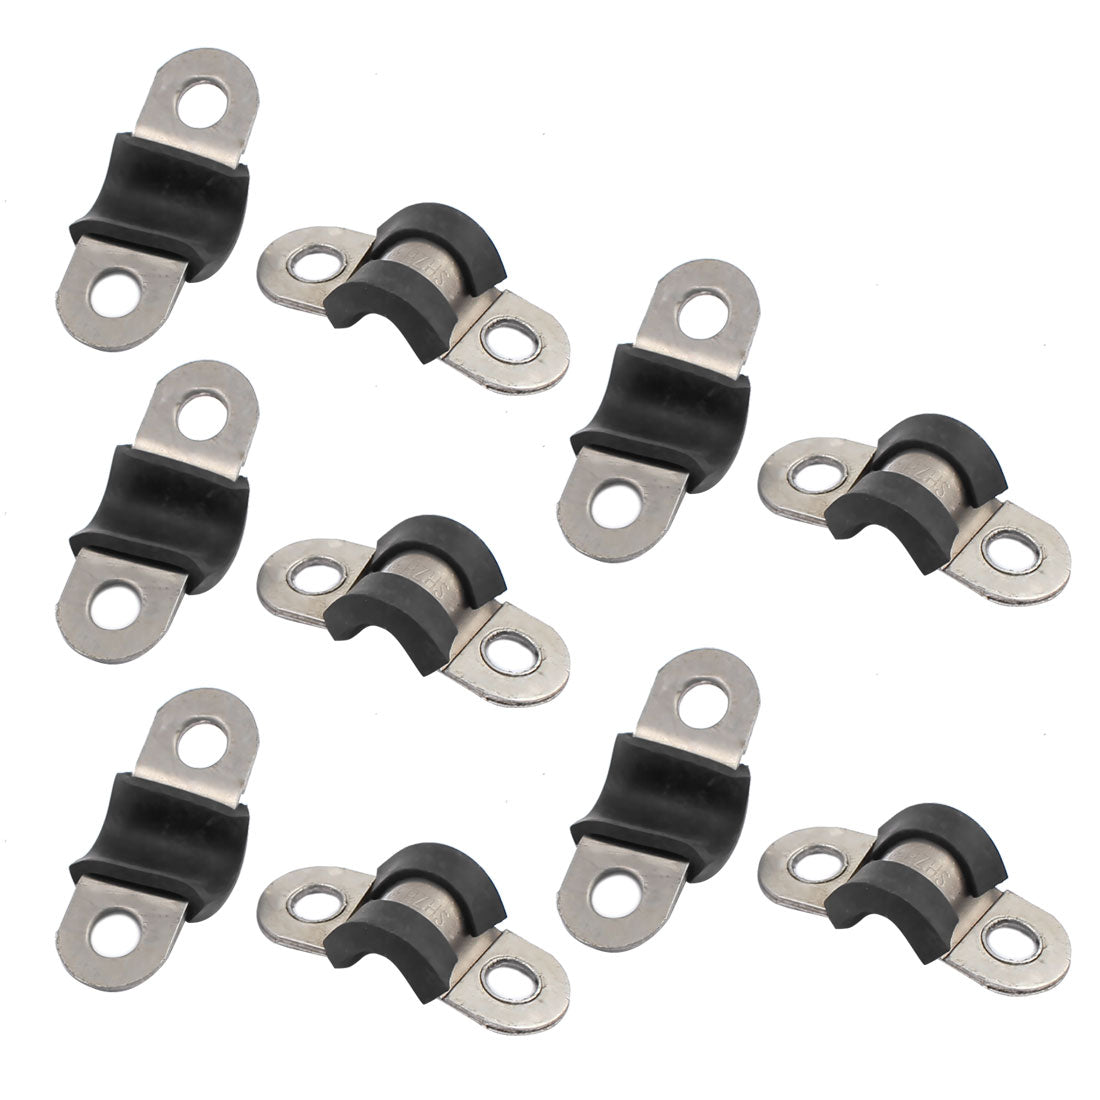 uxcell Uxcell 10Pcs 6mm Dia Rubber Lined U Shaped Stainless Steel Pipe Clips Hose Tube Clamp